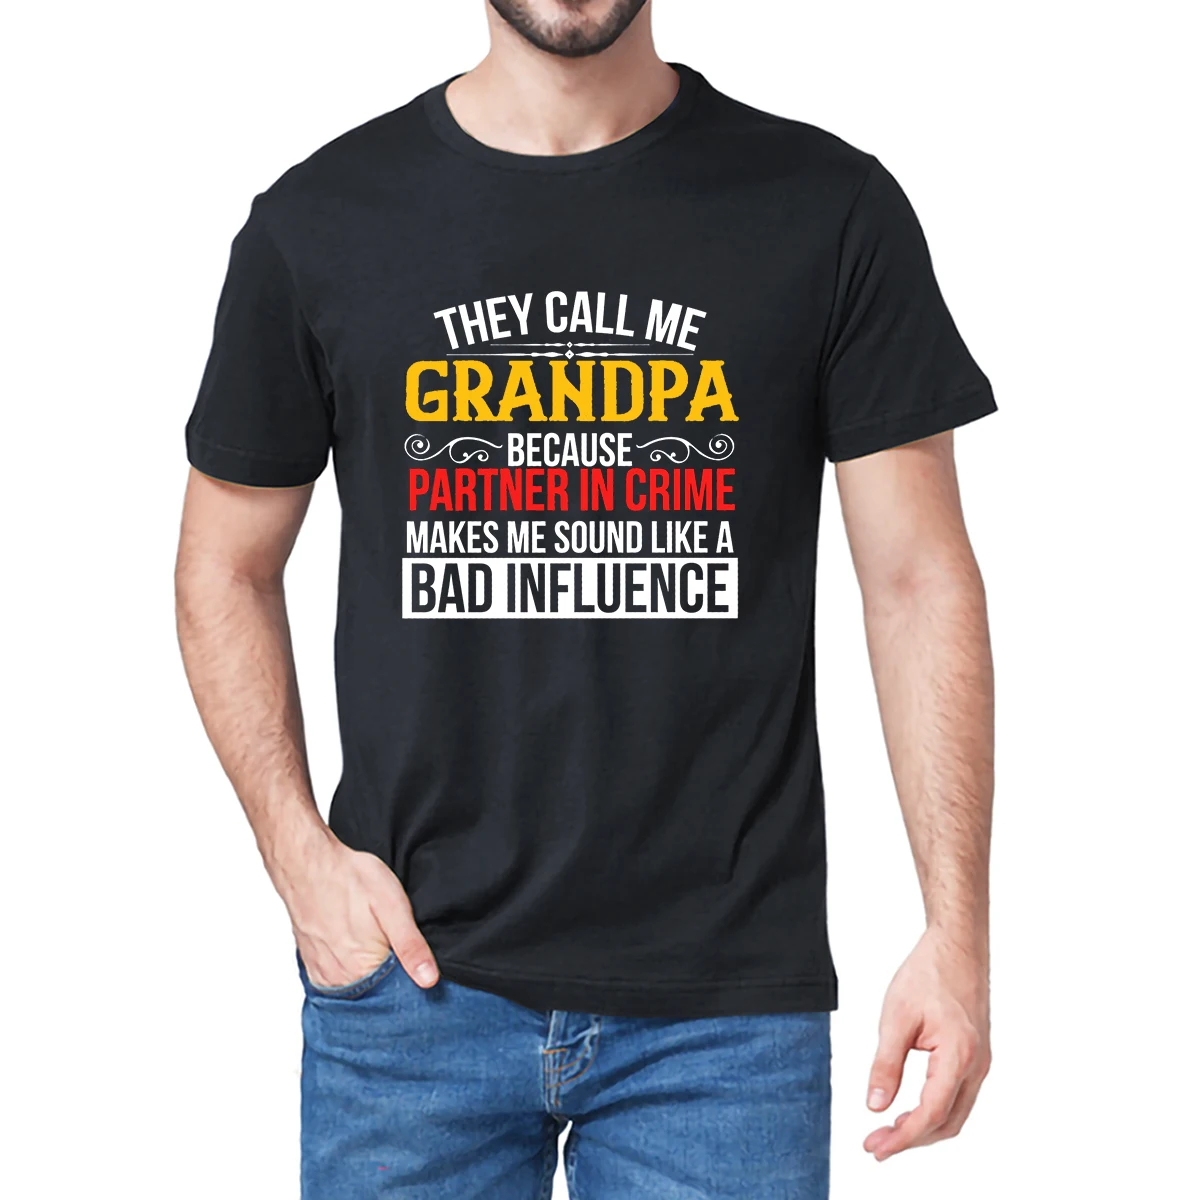 

Unisex Cotton They Call Me Grandma Because Partner In Crime Sound Like A Bad Influence Grandpa Men's Novelty T-Shirt Women Tee